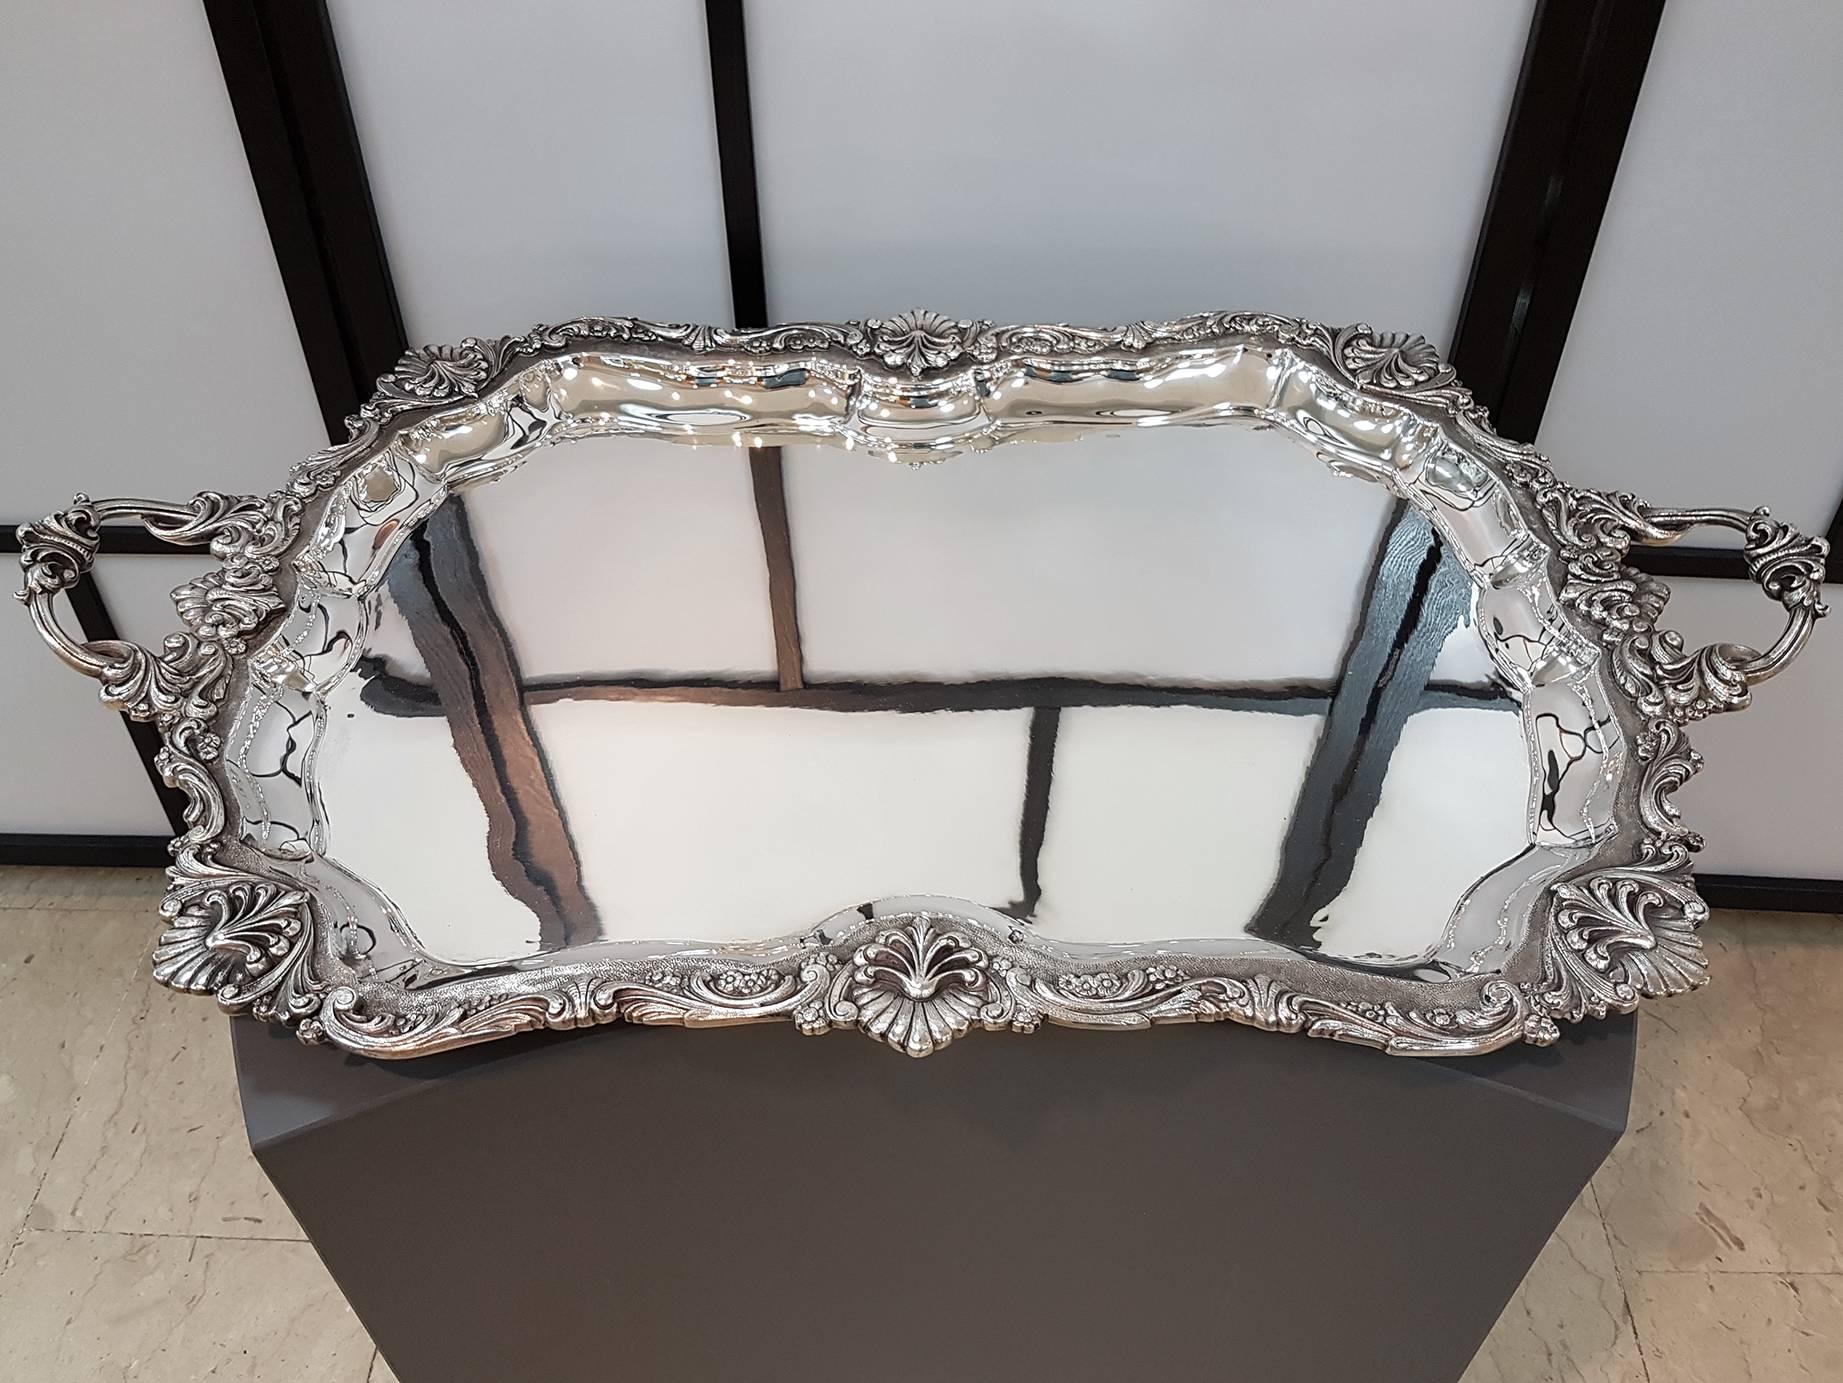 Big Barocco style silver tray with handles and 
the Stand is in a modern, square sectional style
The tray is solid silver 925   70(82 at the handles) x 50 cm. 6,700 grams
Stand is in solid silver 800   45x38 h.62 cm.  3,635 grams
  .